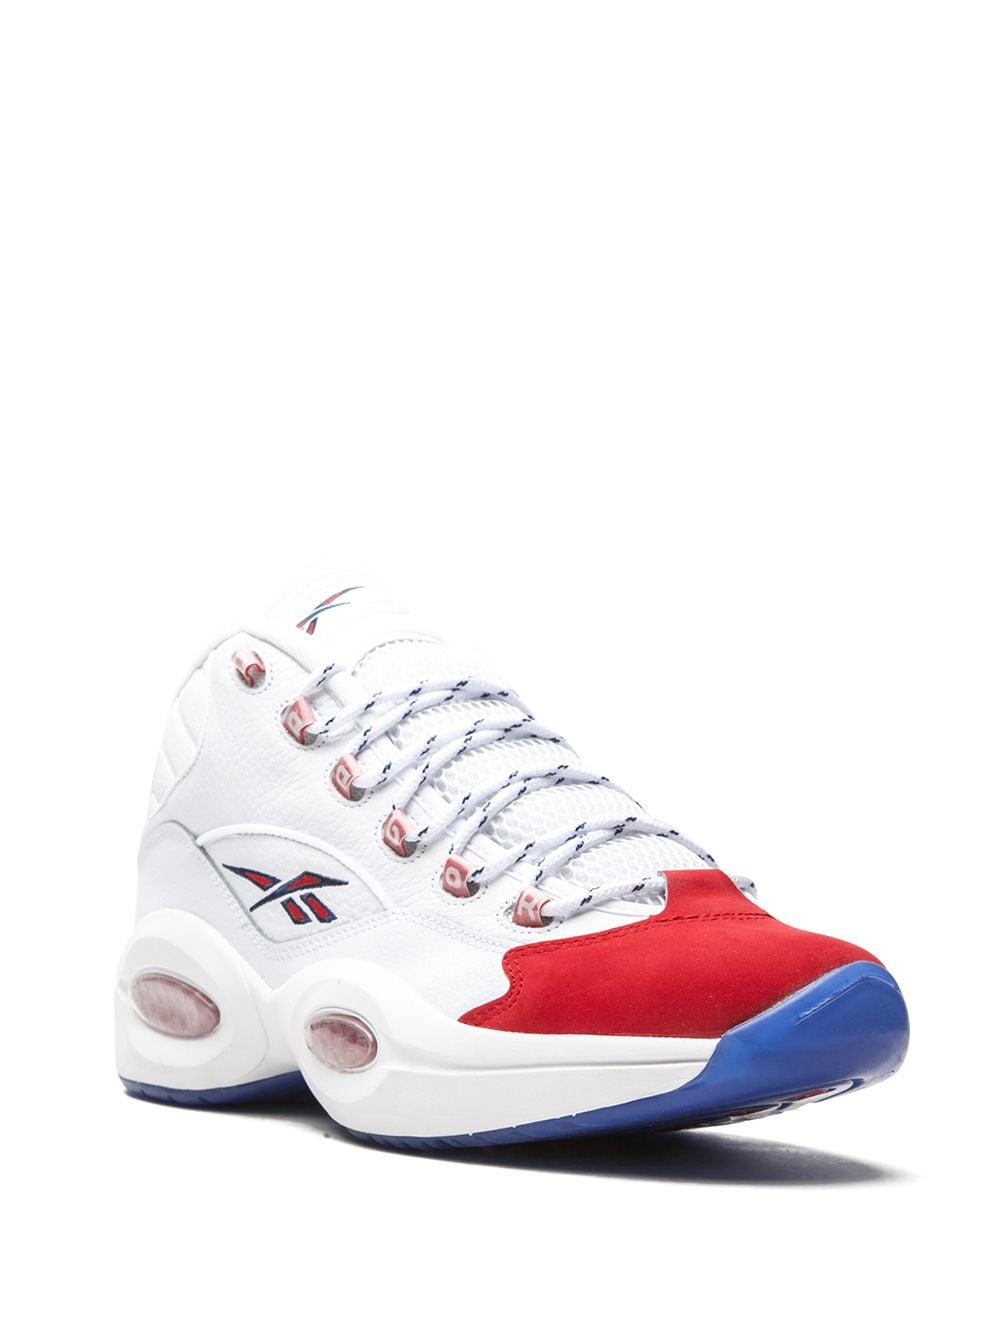 Image 2 of Reebok Question Mid sneakers